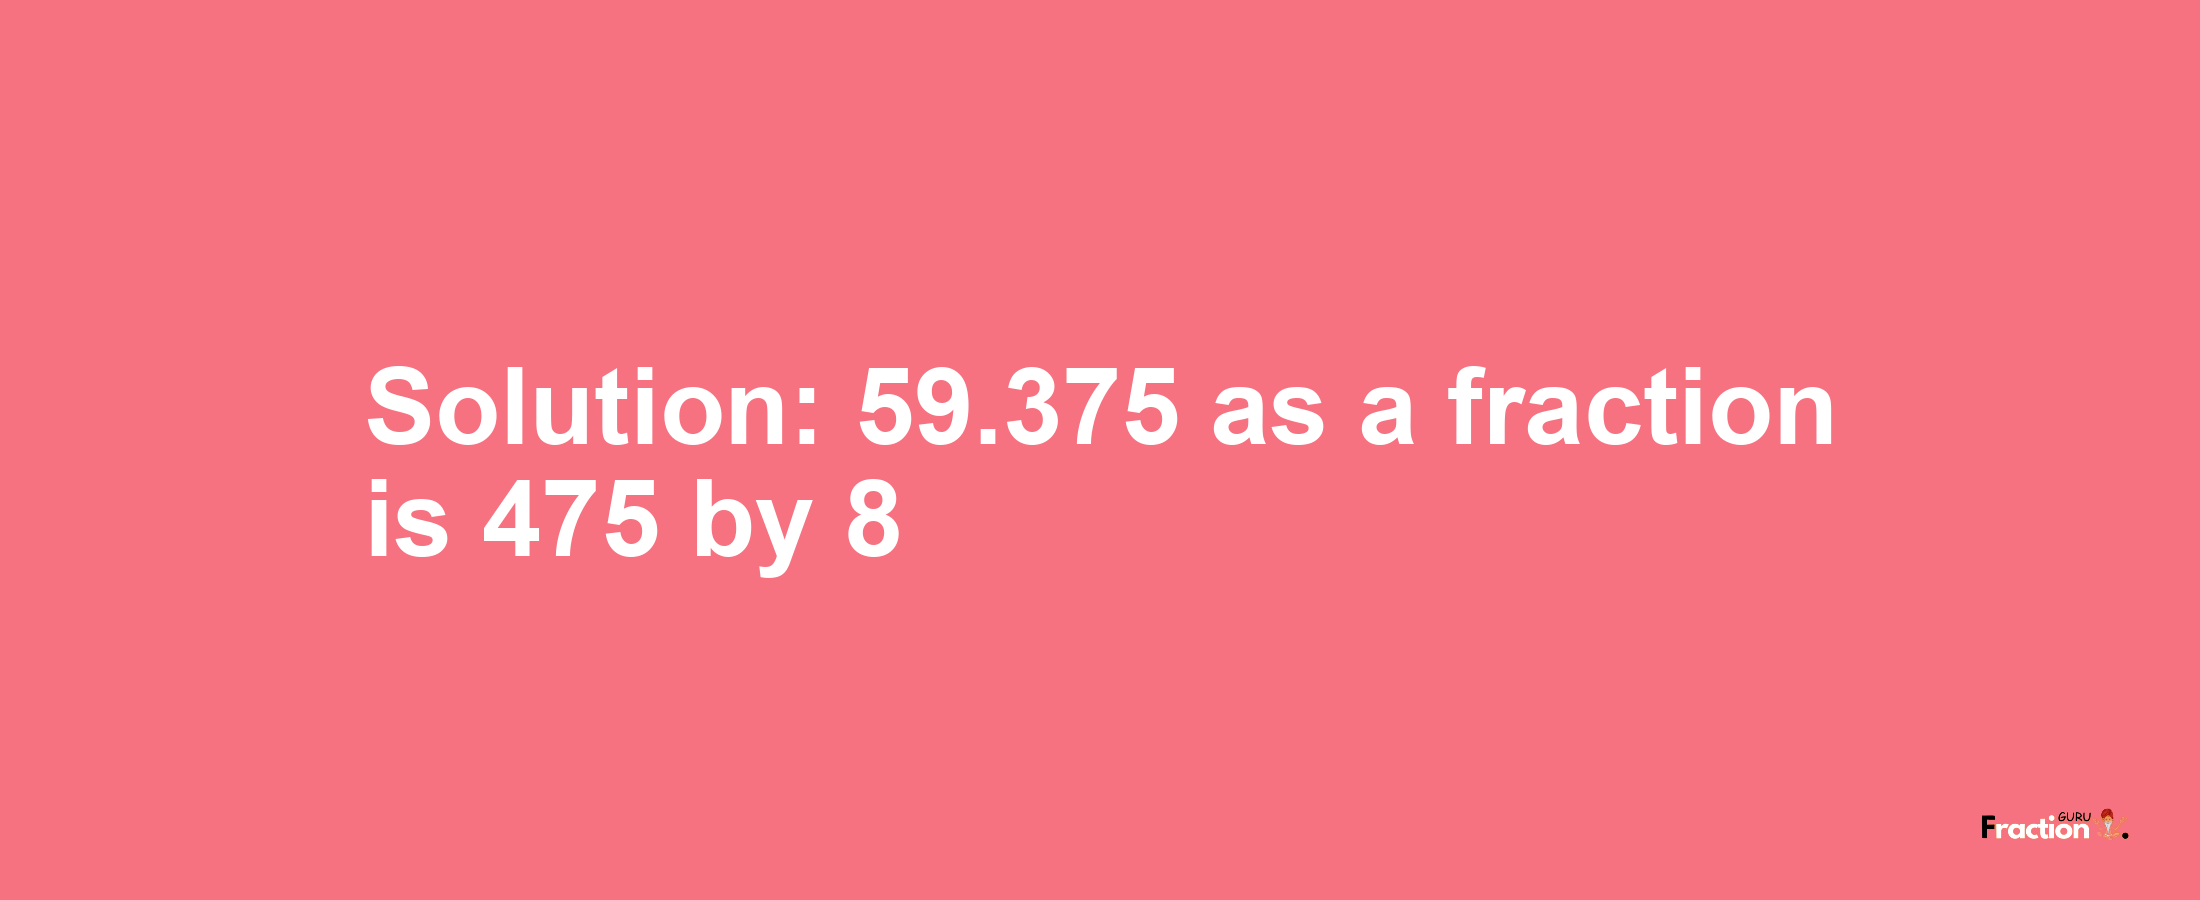 Solution:59.375 as a fraction is 475/8